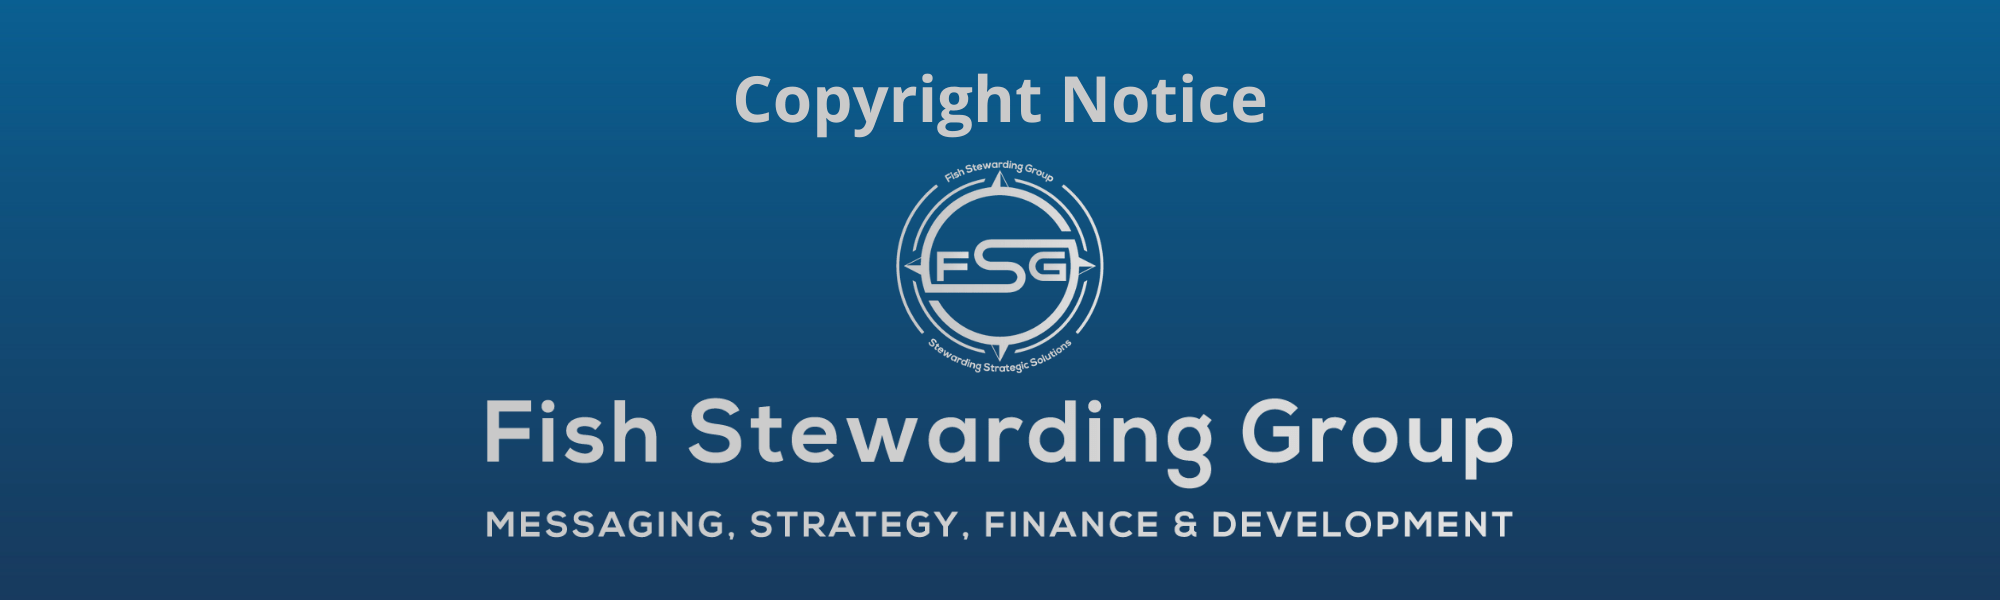 A thin rectangular Footer graphic for the Copyright Notice page. The background is a blue gradient color that goes from a dark blue on the bottom to a lighter blue on top. The text in gray on top reads Copyright Notice and FAQs. The text in gray on the bottom center reads: Fish Stewarding Group and beneath that, the text reads Messaging, Strategy, Finance and Development. In the center above the text is the FSG logo in gray. The logo has the letters FSG in the middle with a circle with four pointed arrows facing north, south, east and west with the S connected to that circle. Four rounded lines make the next circle of the circle and the last layer is a thin circle with the text on the Bottom that reads Stewarding Strategist Solutions and on top, the text reads Fish Stewarding Group.